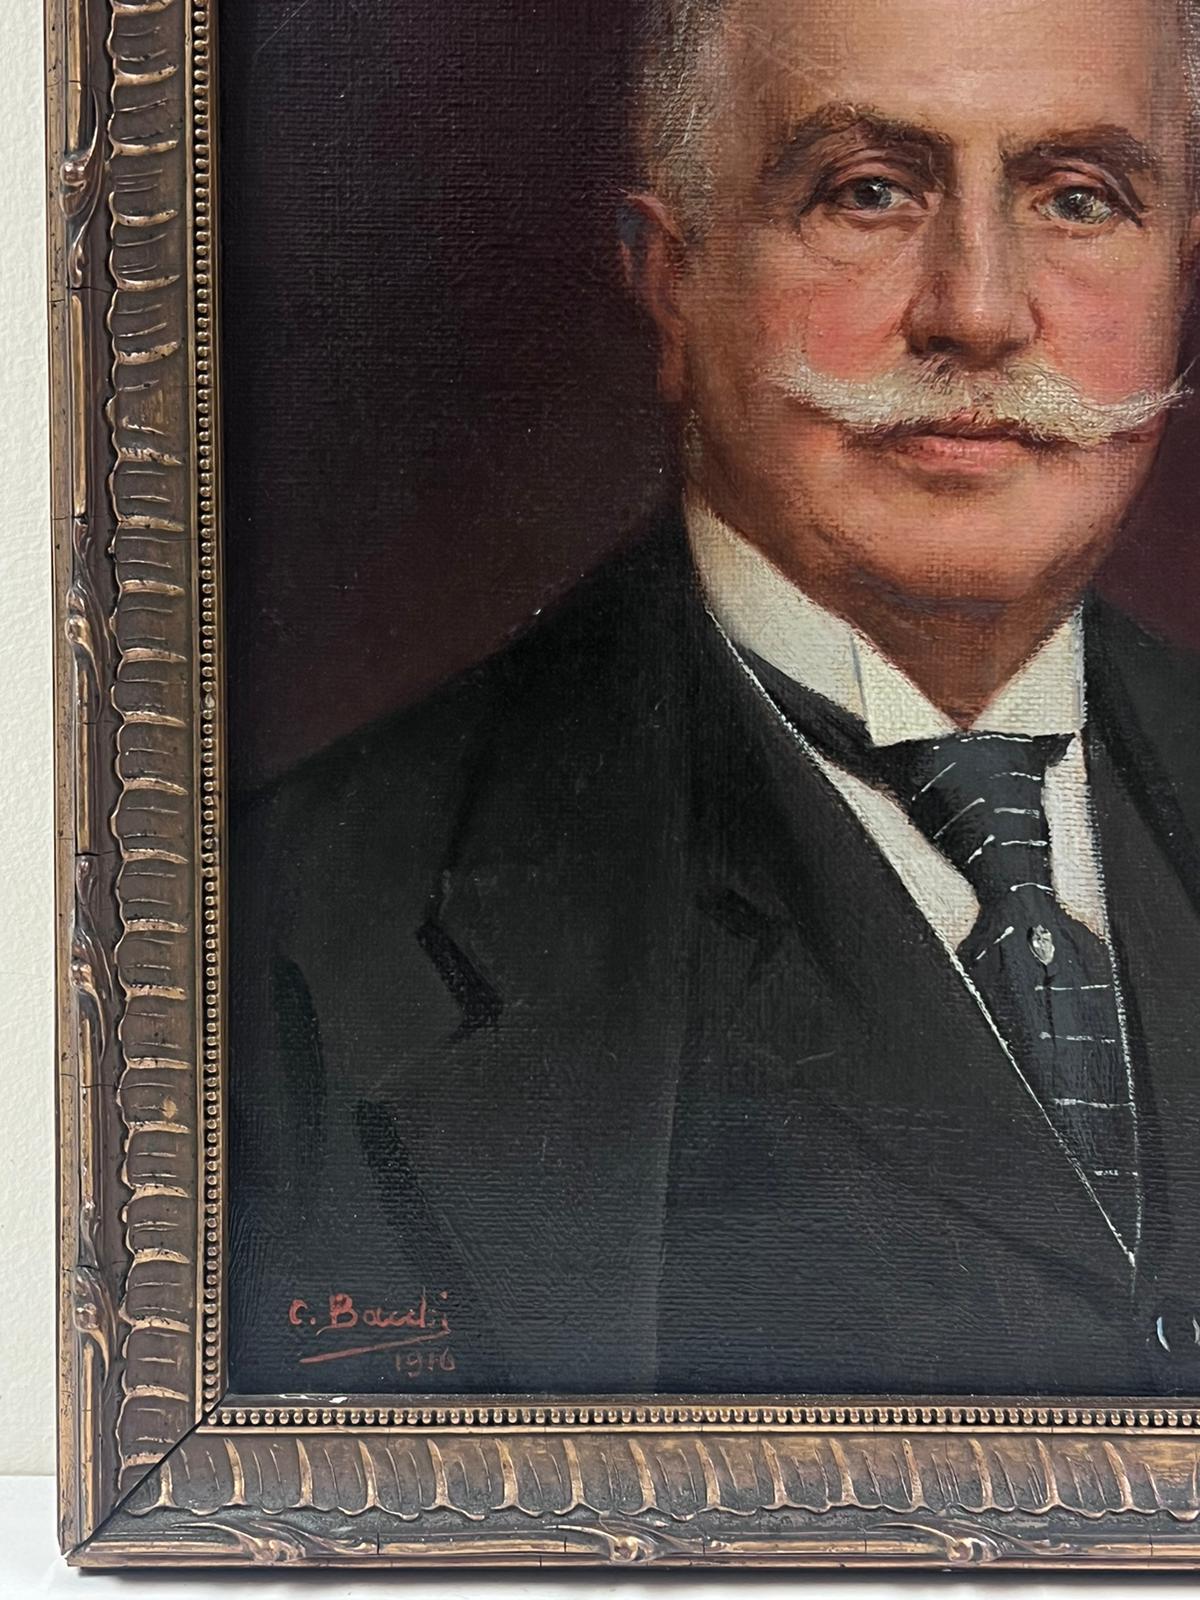 Portrait of a Gentleman
French School, signed and dated 1916
oil painting on canvas, framed
framed: 14.5 x 11 inches
canvas: 13 x 9.5 inches
provenance: private collection, France
condition: very good and sound condition